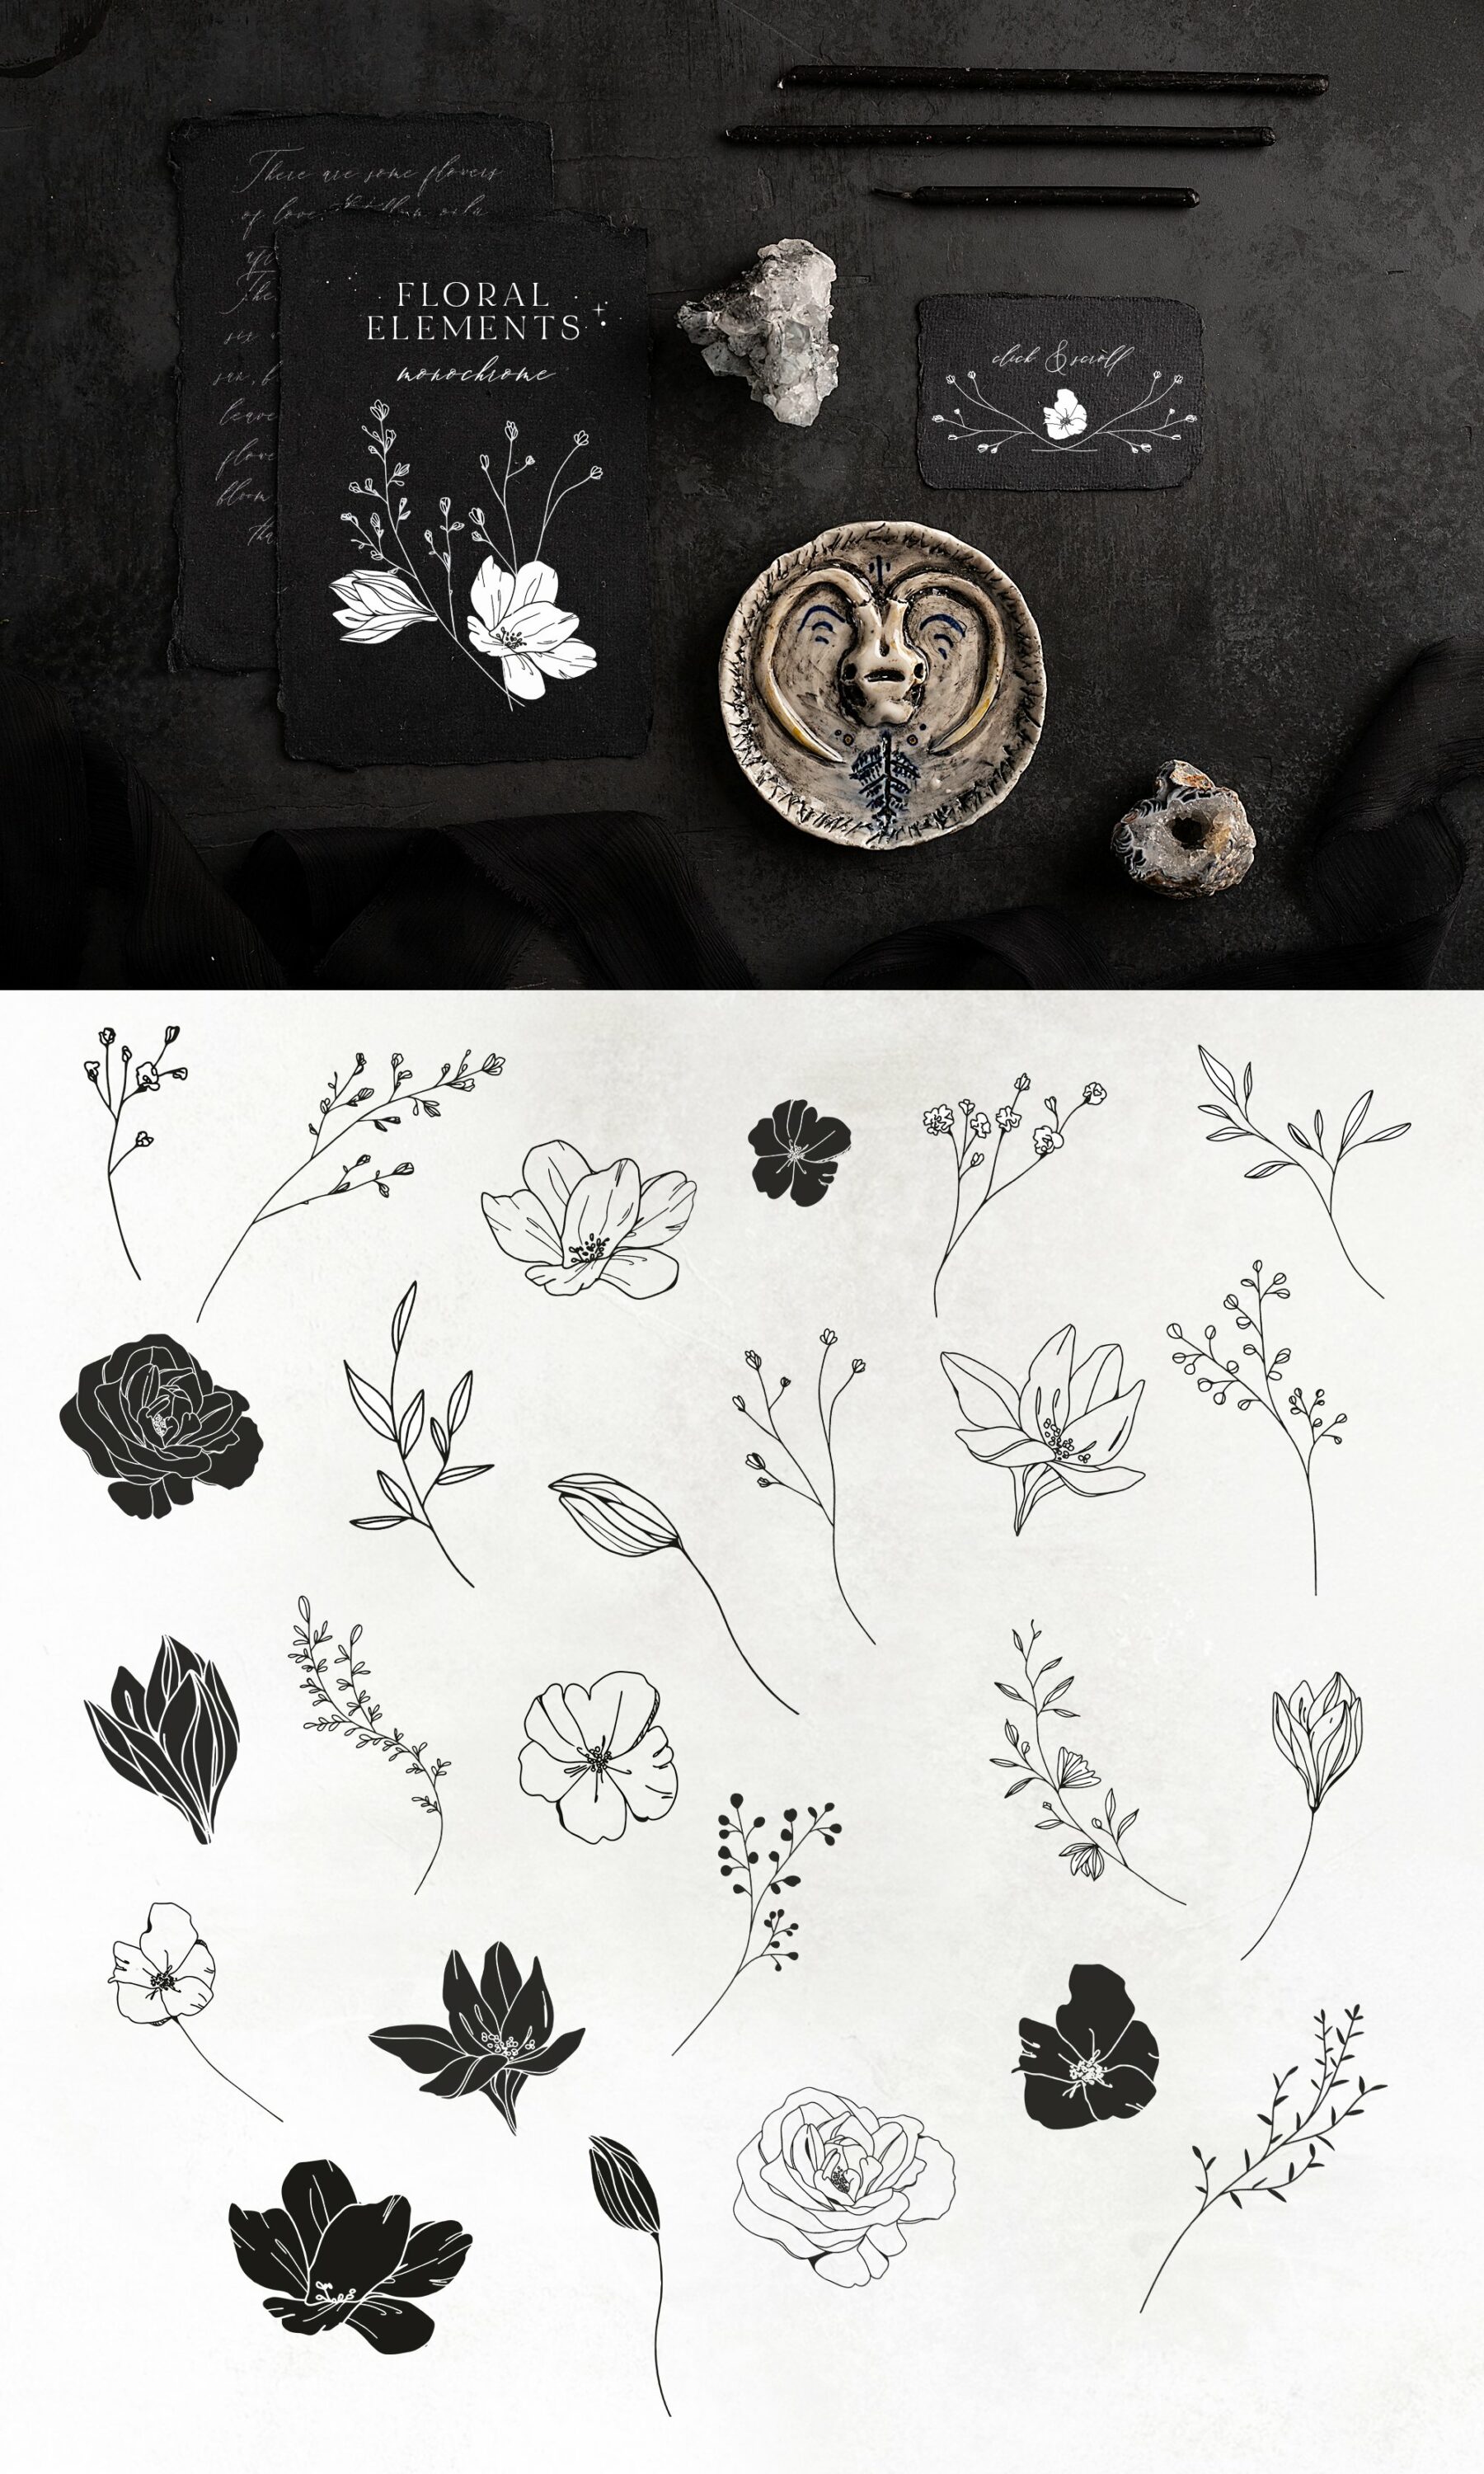 Delicate flowers illustrations in an outline and black.